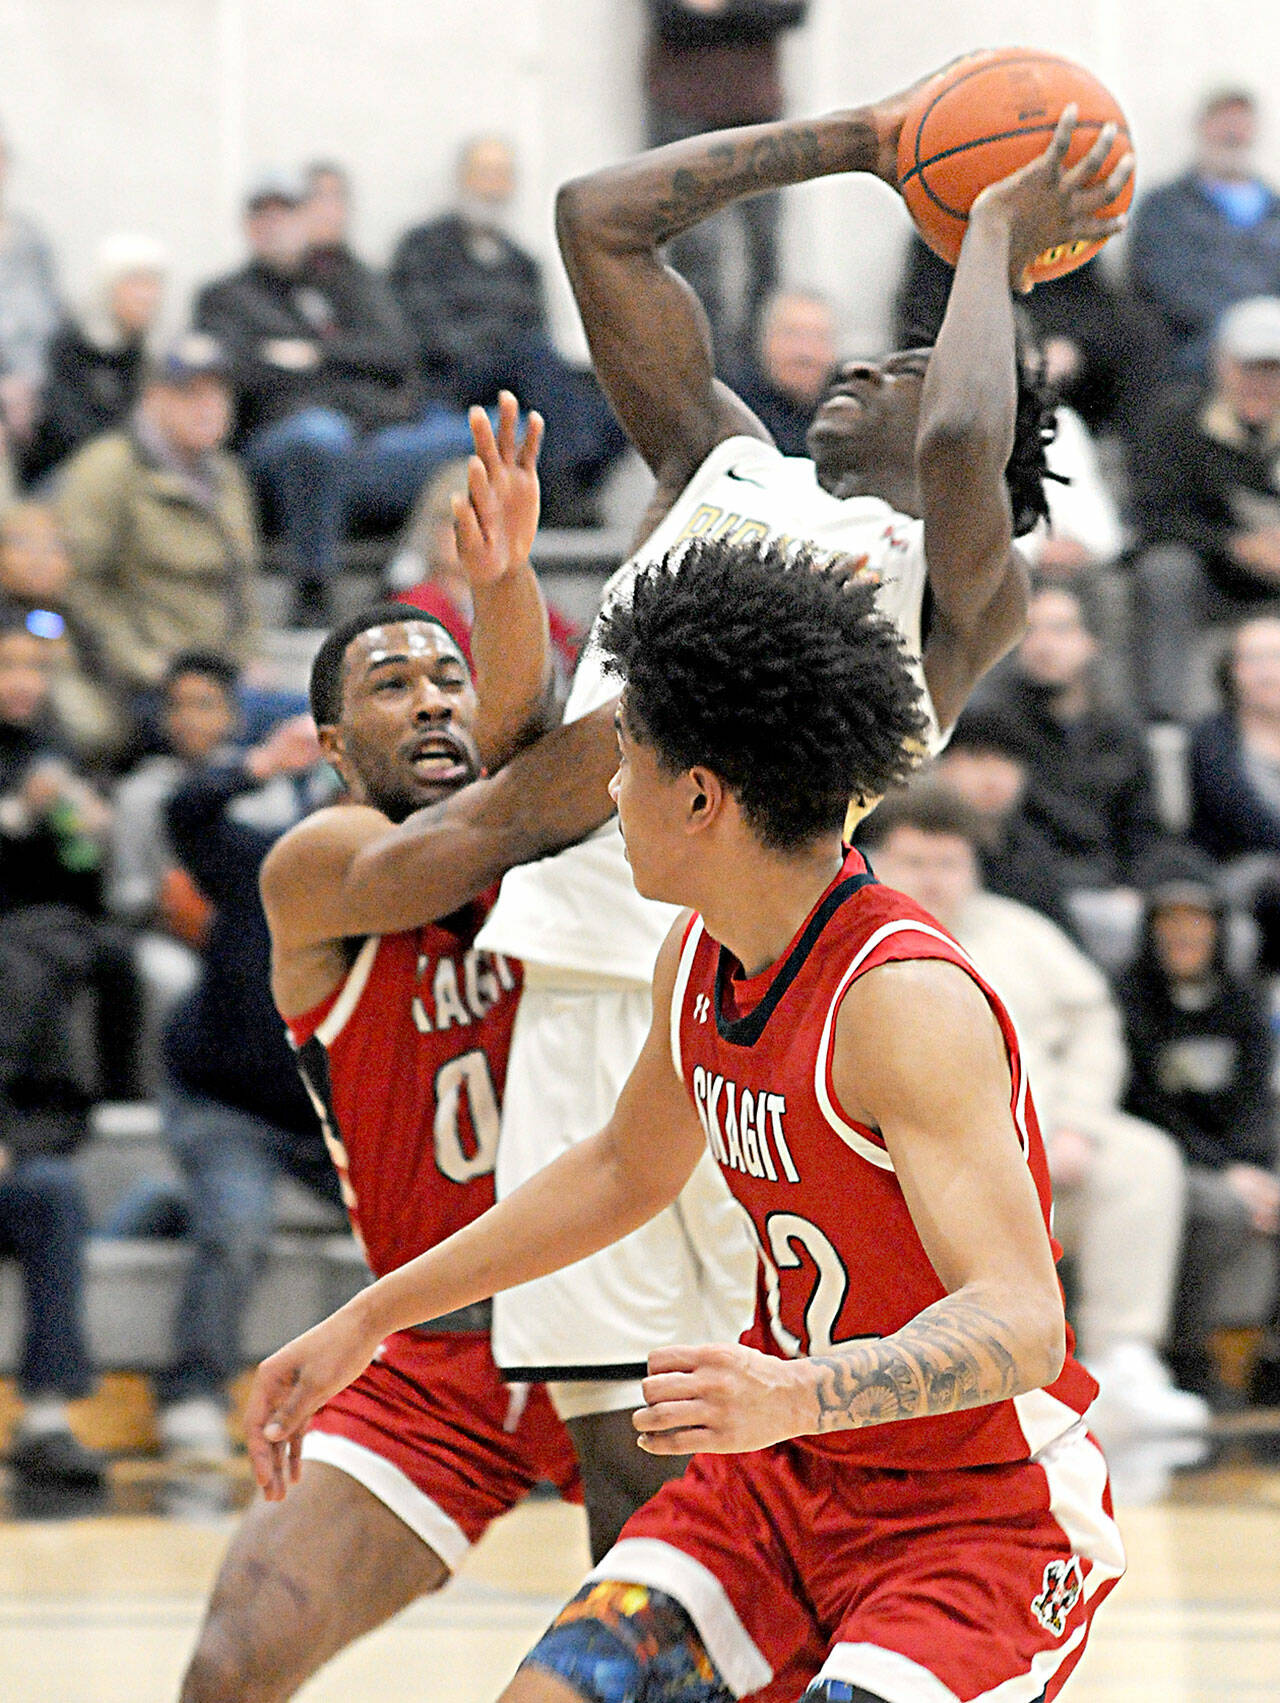 KEITH THORPE/PENINSULA DAILY NEWS
Peninsula's Ese Onakpoma, center, shoots pass Skagit Valley defenders Omari Maulana, left, and Hodges Flemming on Wednesday night's game in Port Angeles.